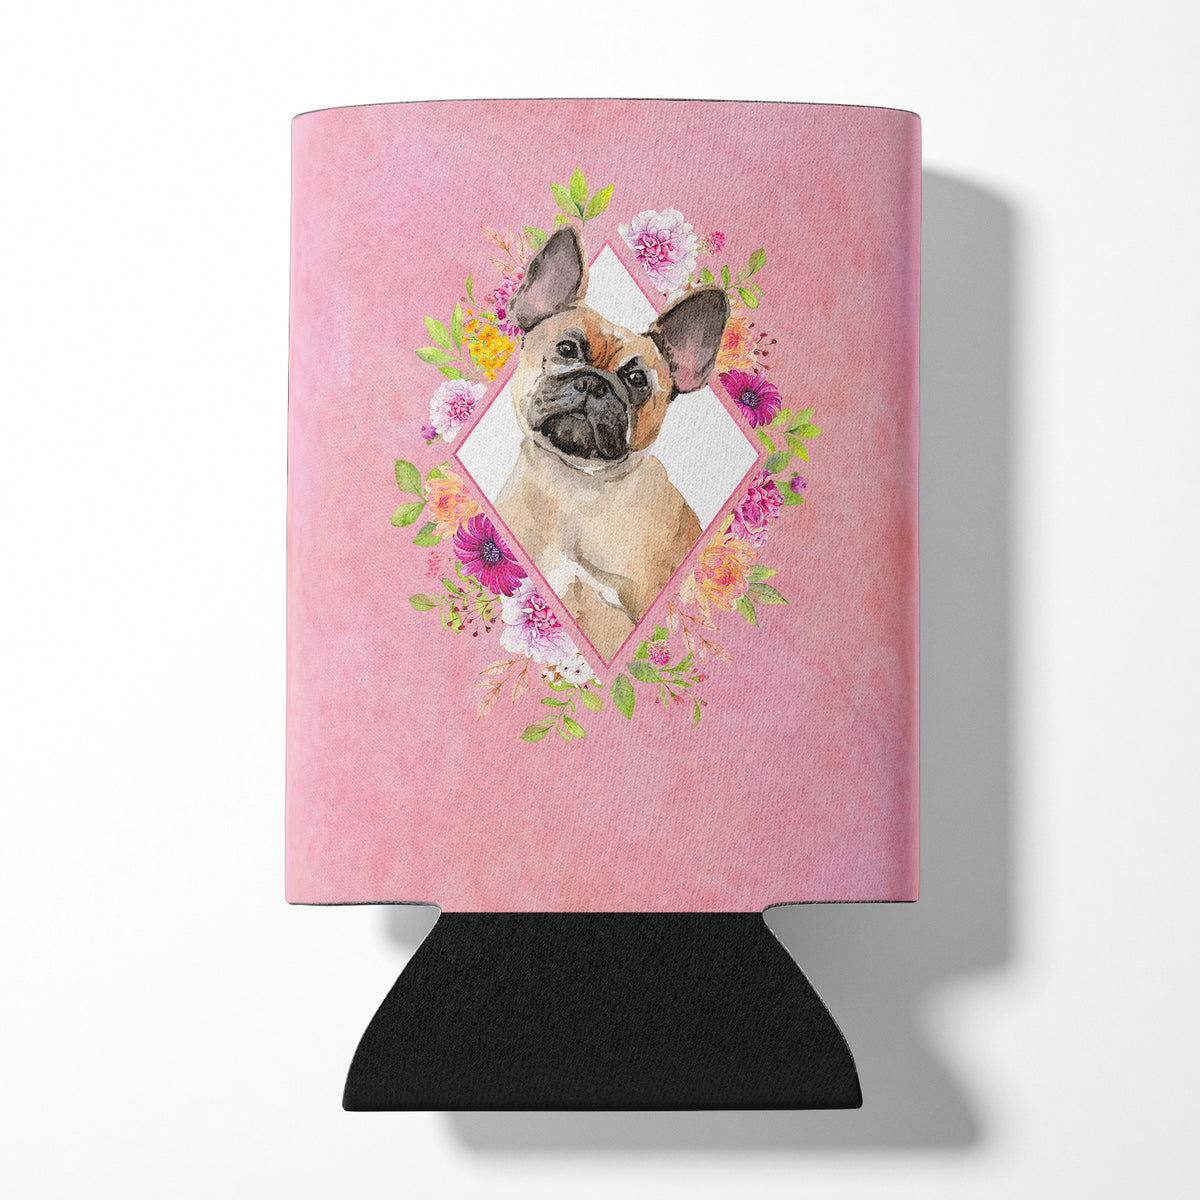 Fawn French Bulldog Pink Flowers Can or Bottle Hugger CK4238CC